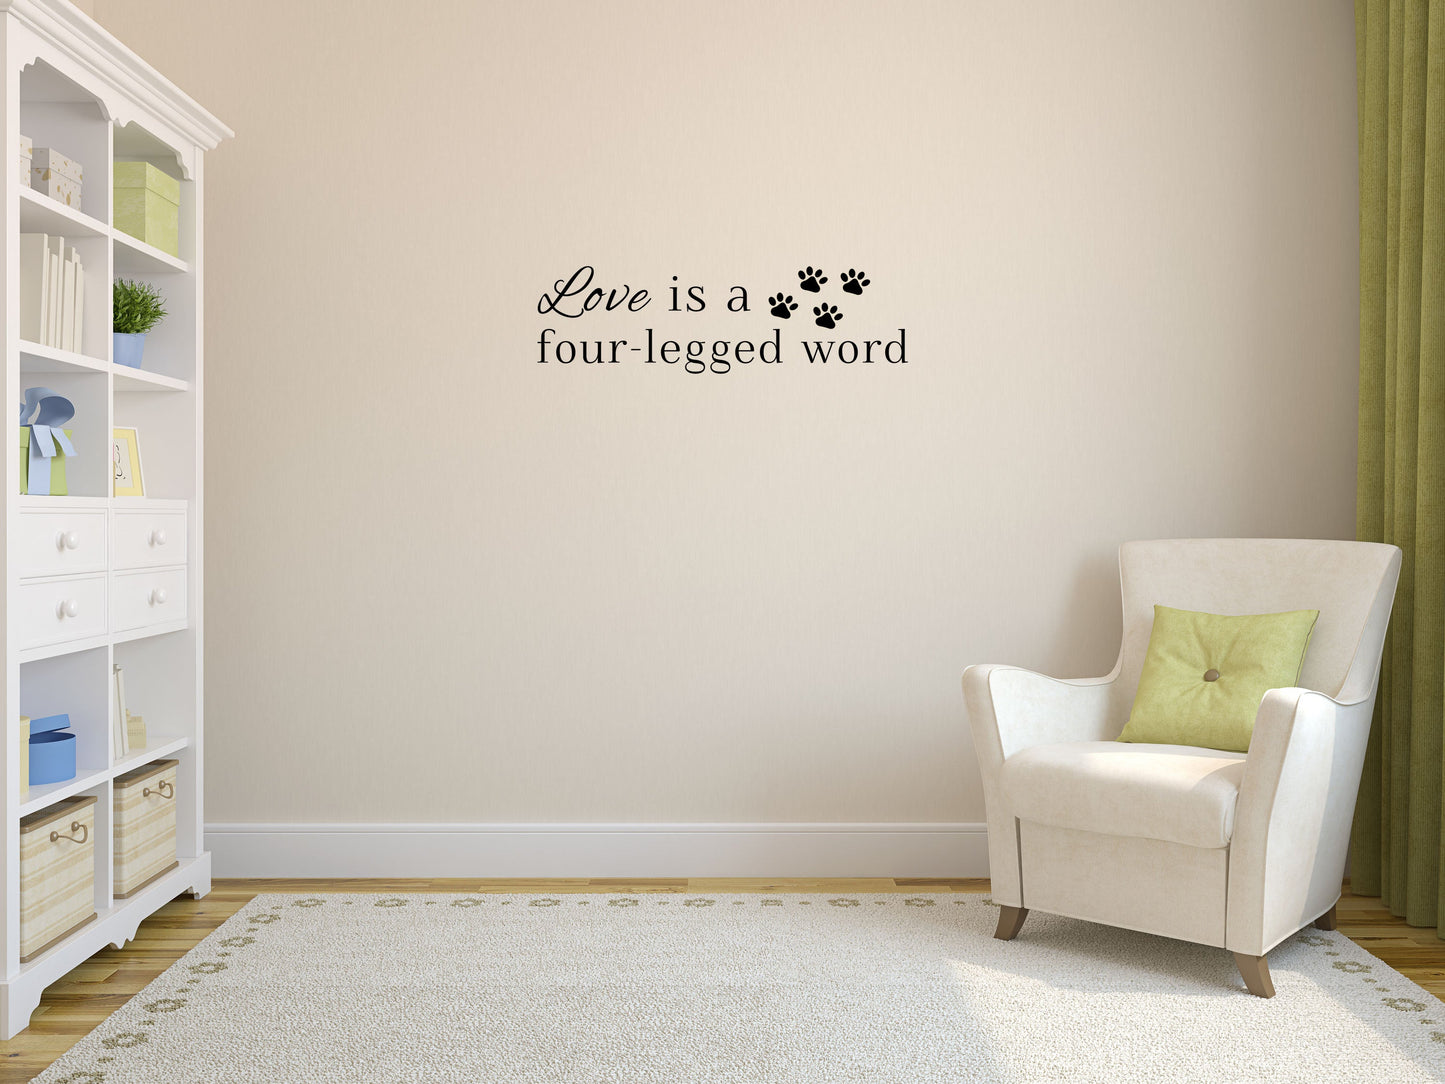 Love Is A Four-Legged Word Vinyl Wall Decal Inspirational Wall Signs 